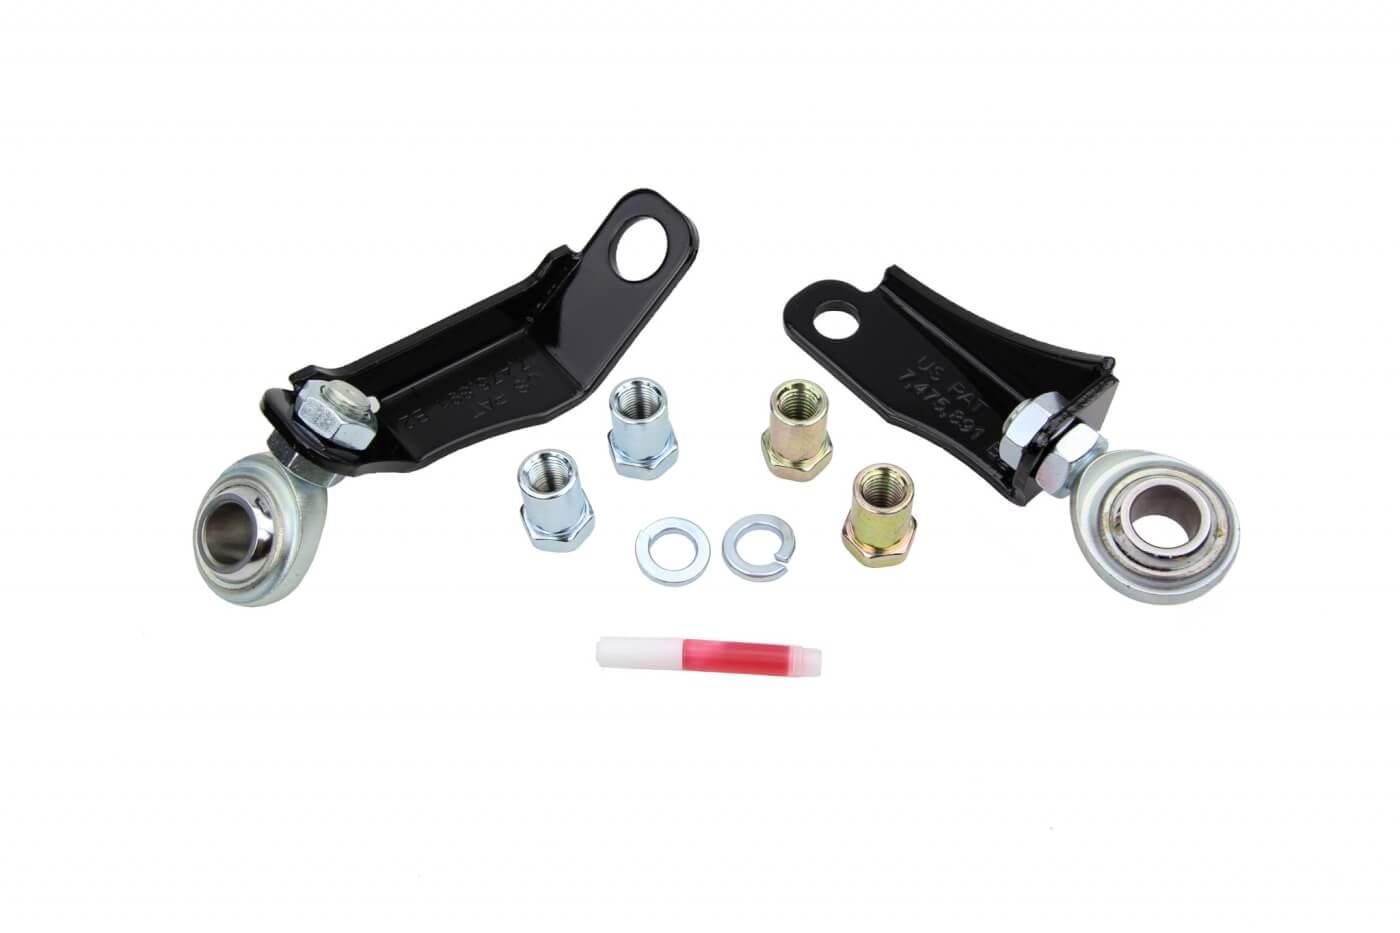 8. These small but simple items make up the Cognito pitman arm and idler arm brace kit. The stock components move around as you steer your truck down the road. Stiffening the mounting improves steering feel and response.